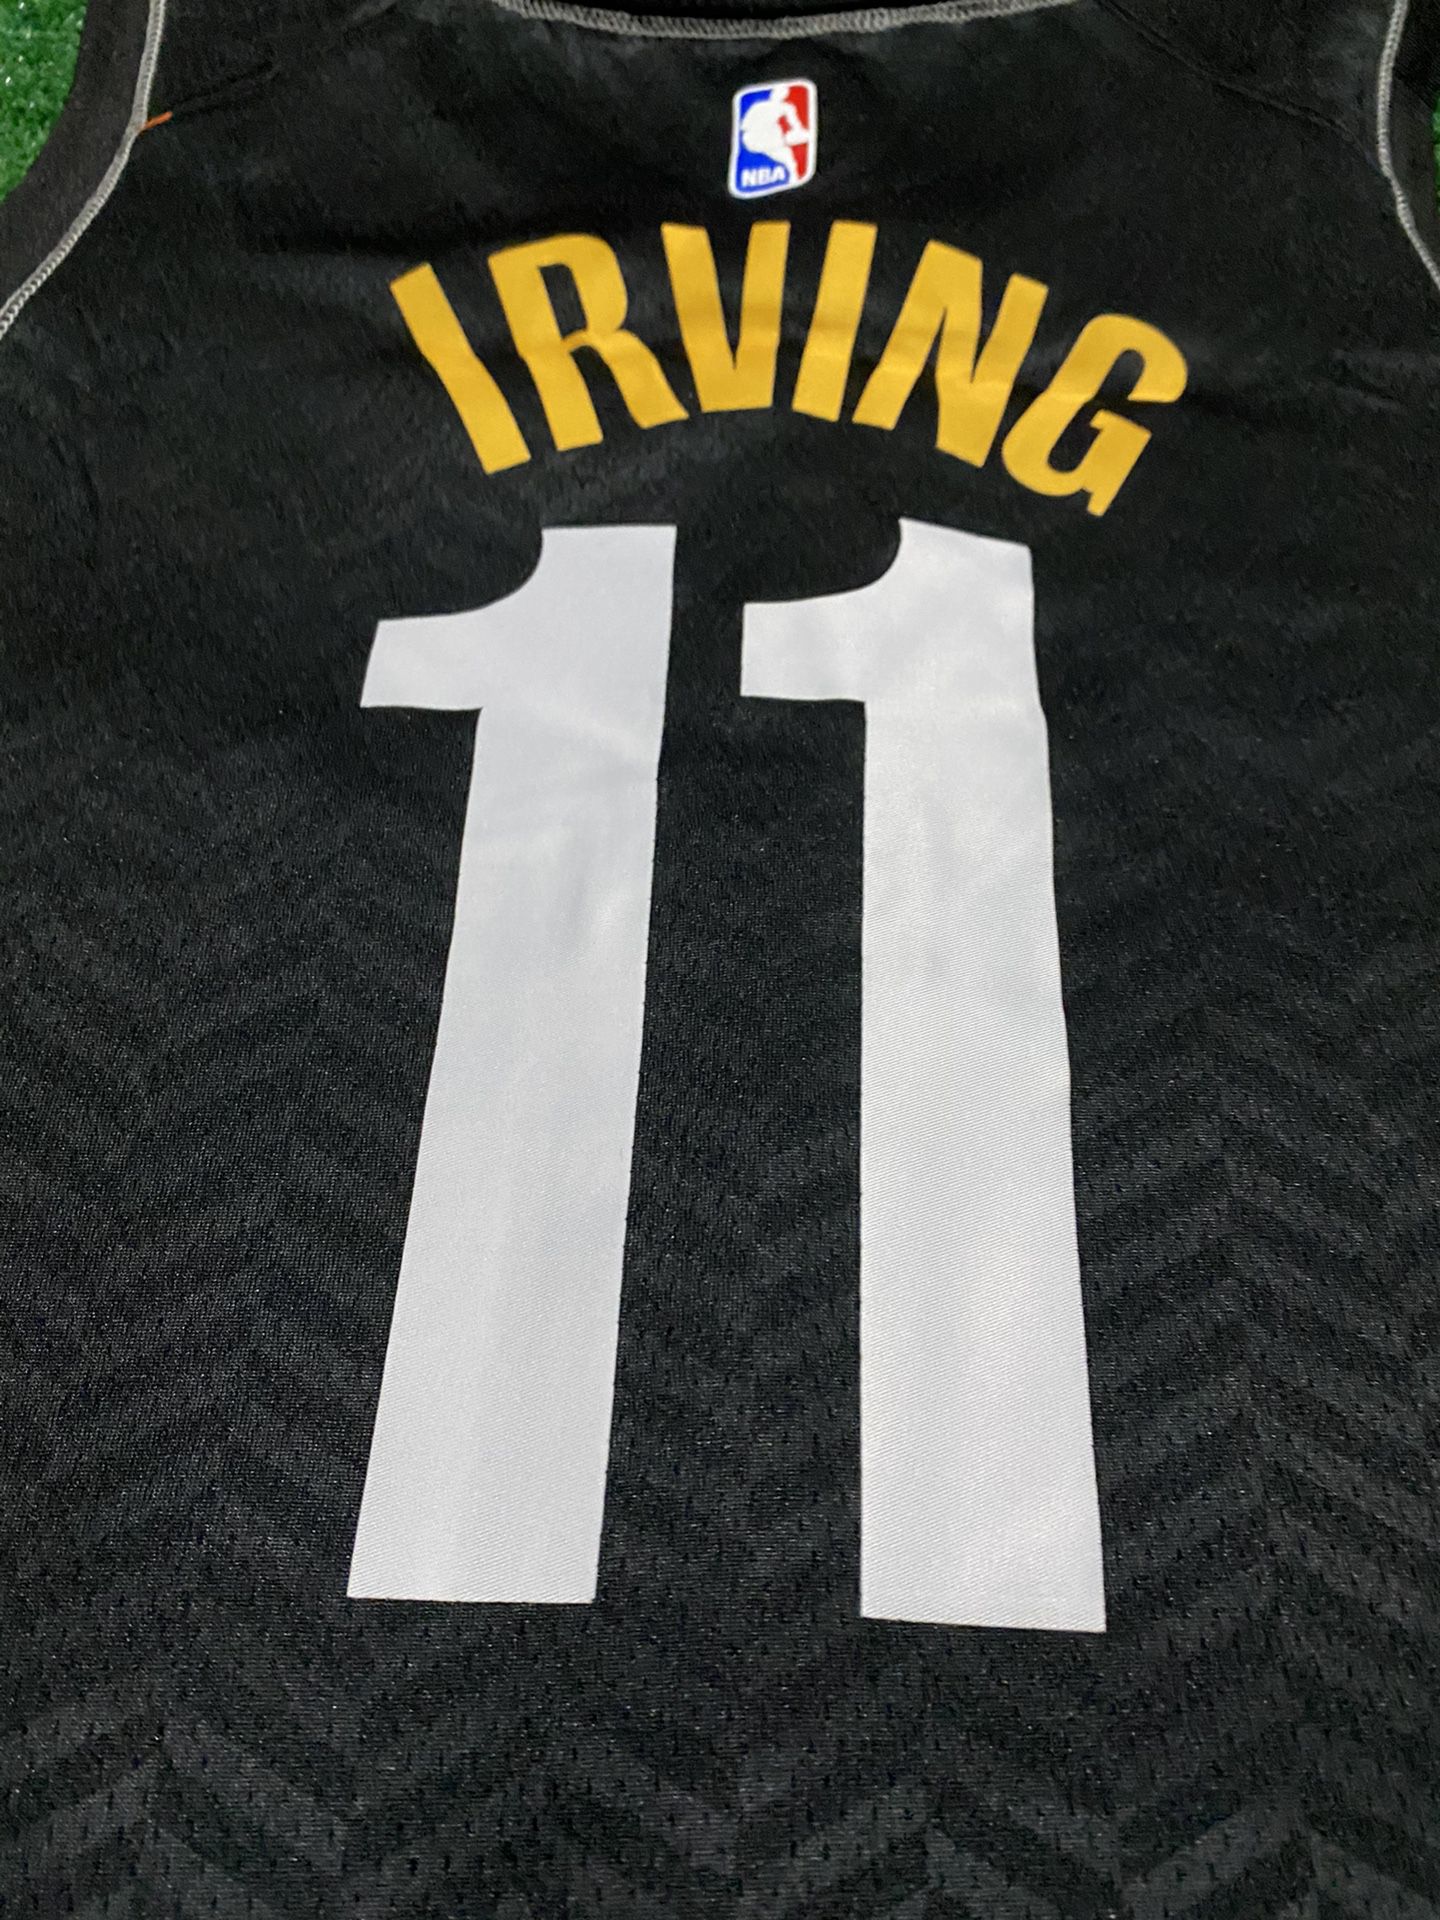 Kyrie Irving Nets City Edition for Sale in Chicago, IL - OfferUp